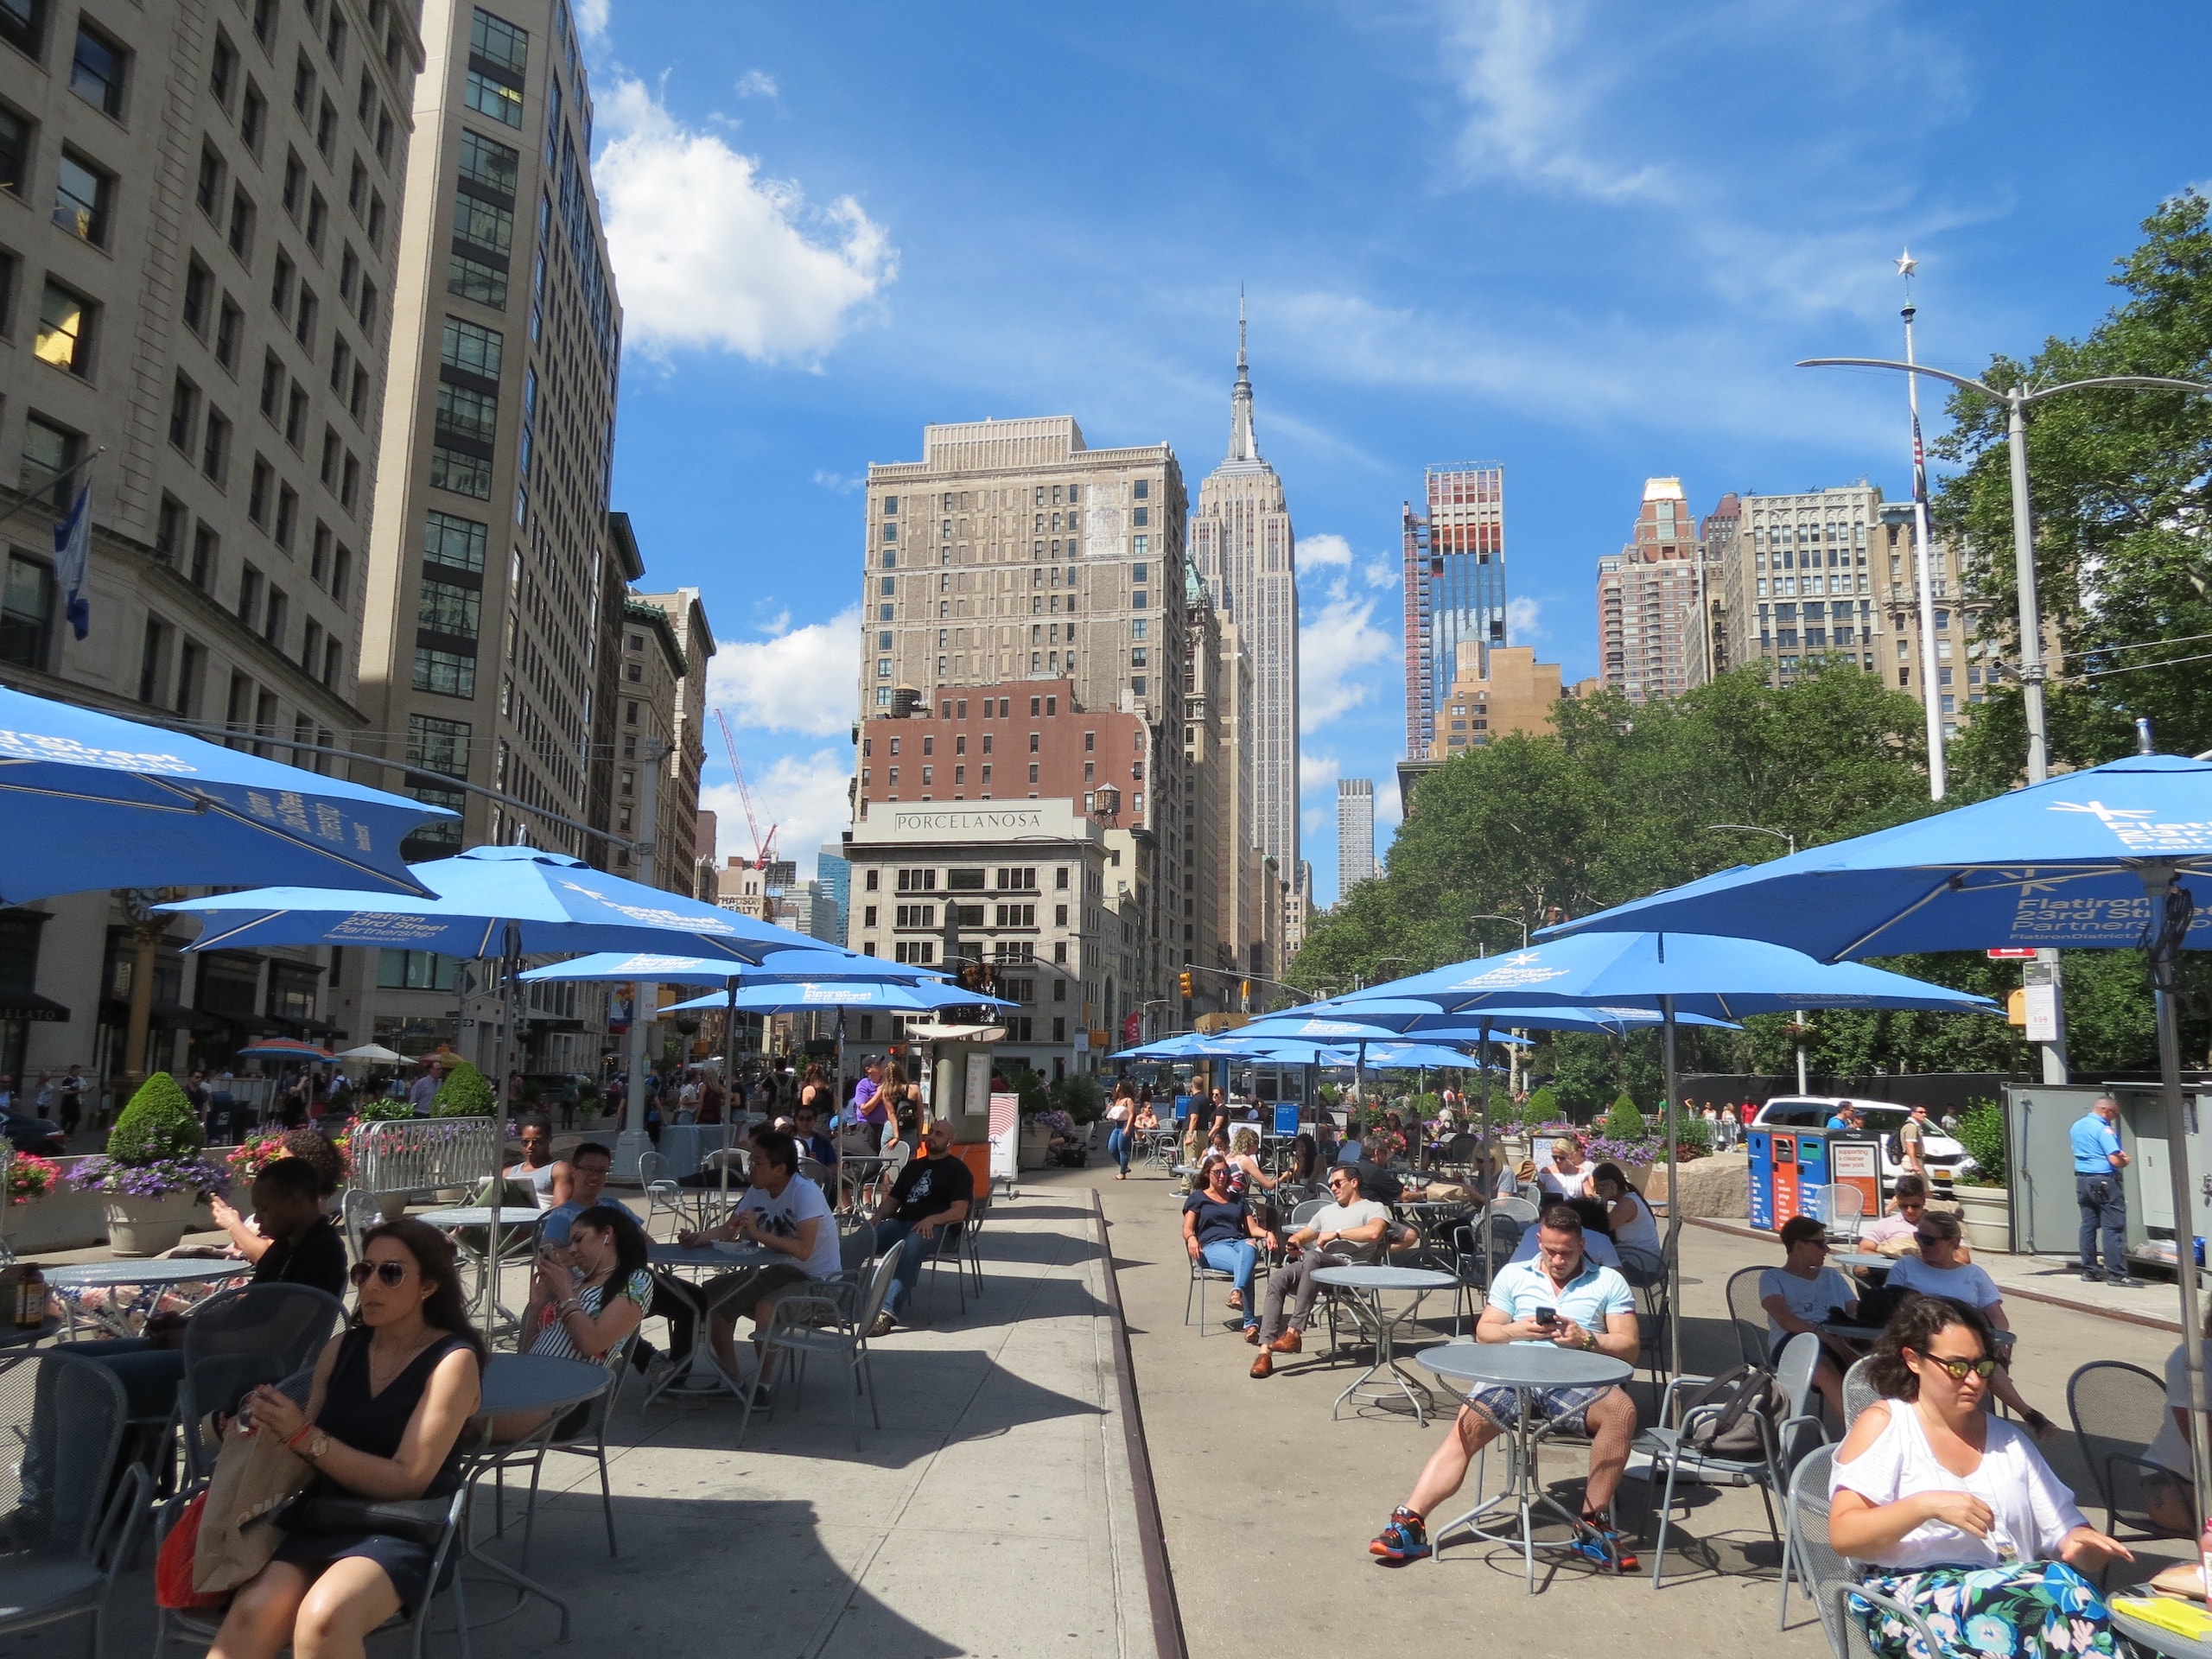 Blue umbrellas shade people sitting at tables and chairs throughout the North Flatiron Plaza